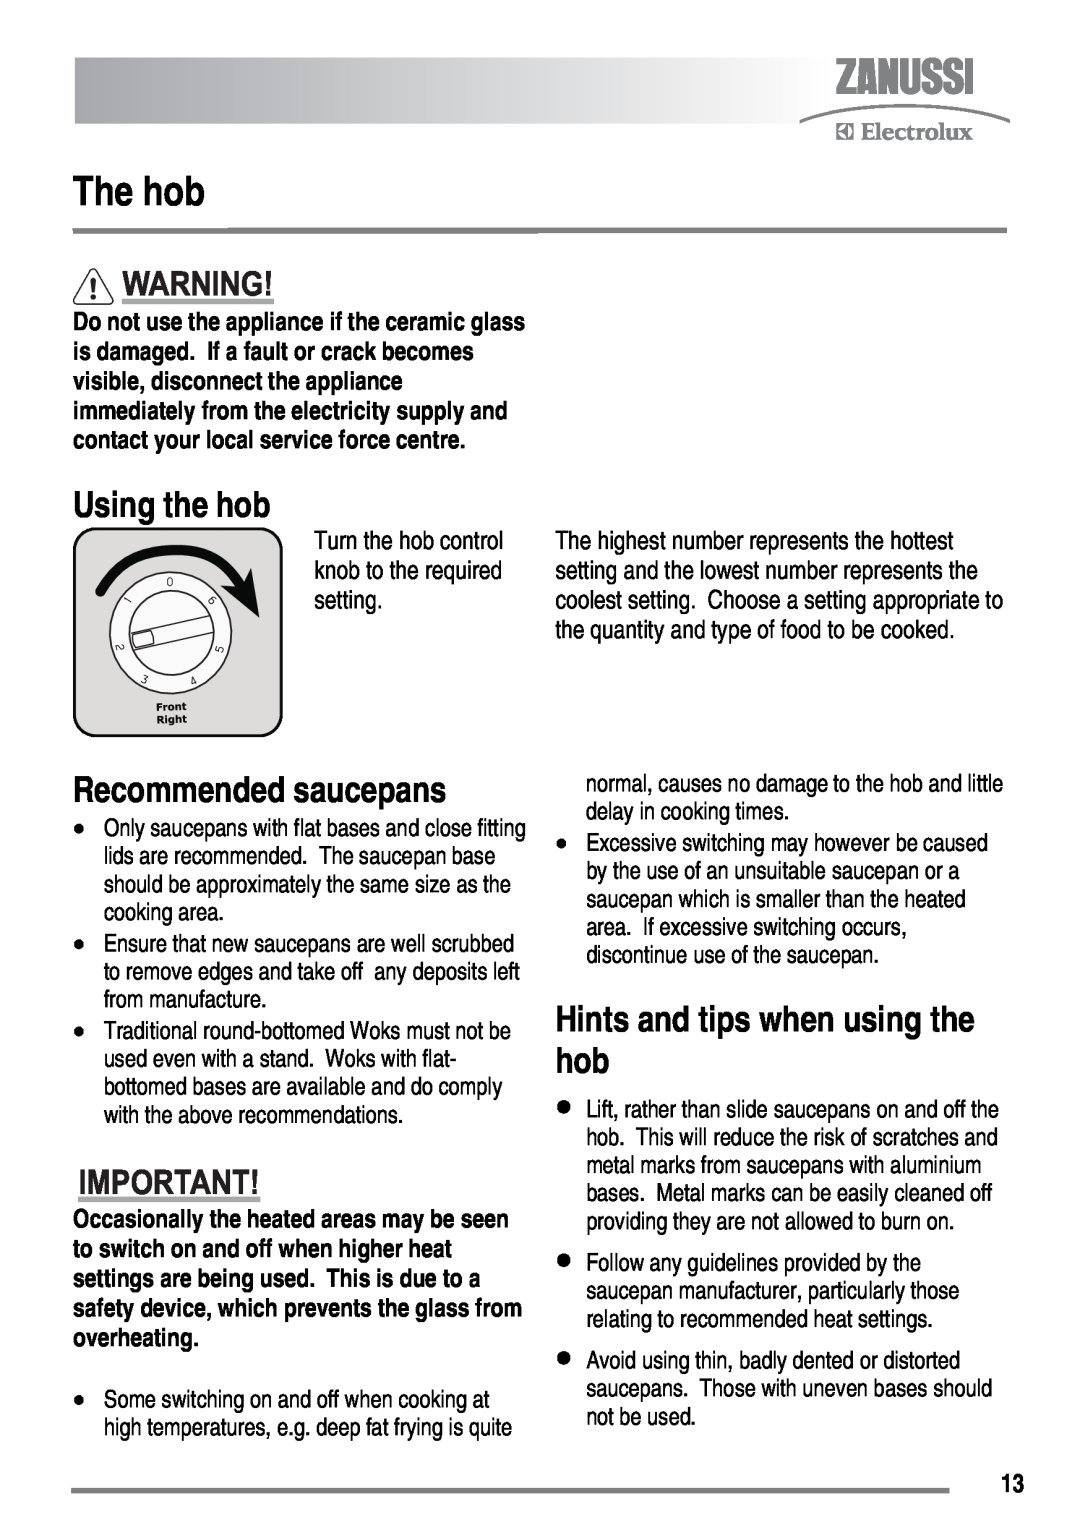 Zanussi ZKC5540 user manual The hob, Using the hob, Recommended saucepans, Hints and tips when using the hob 